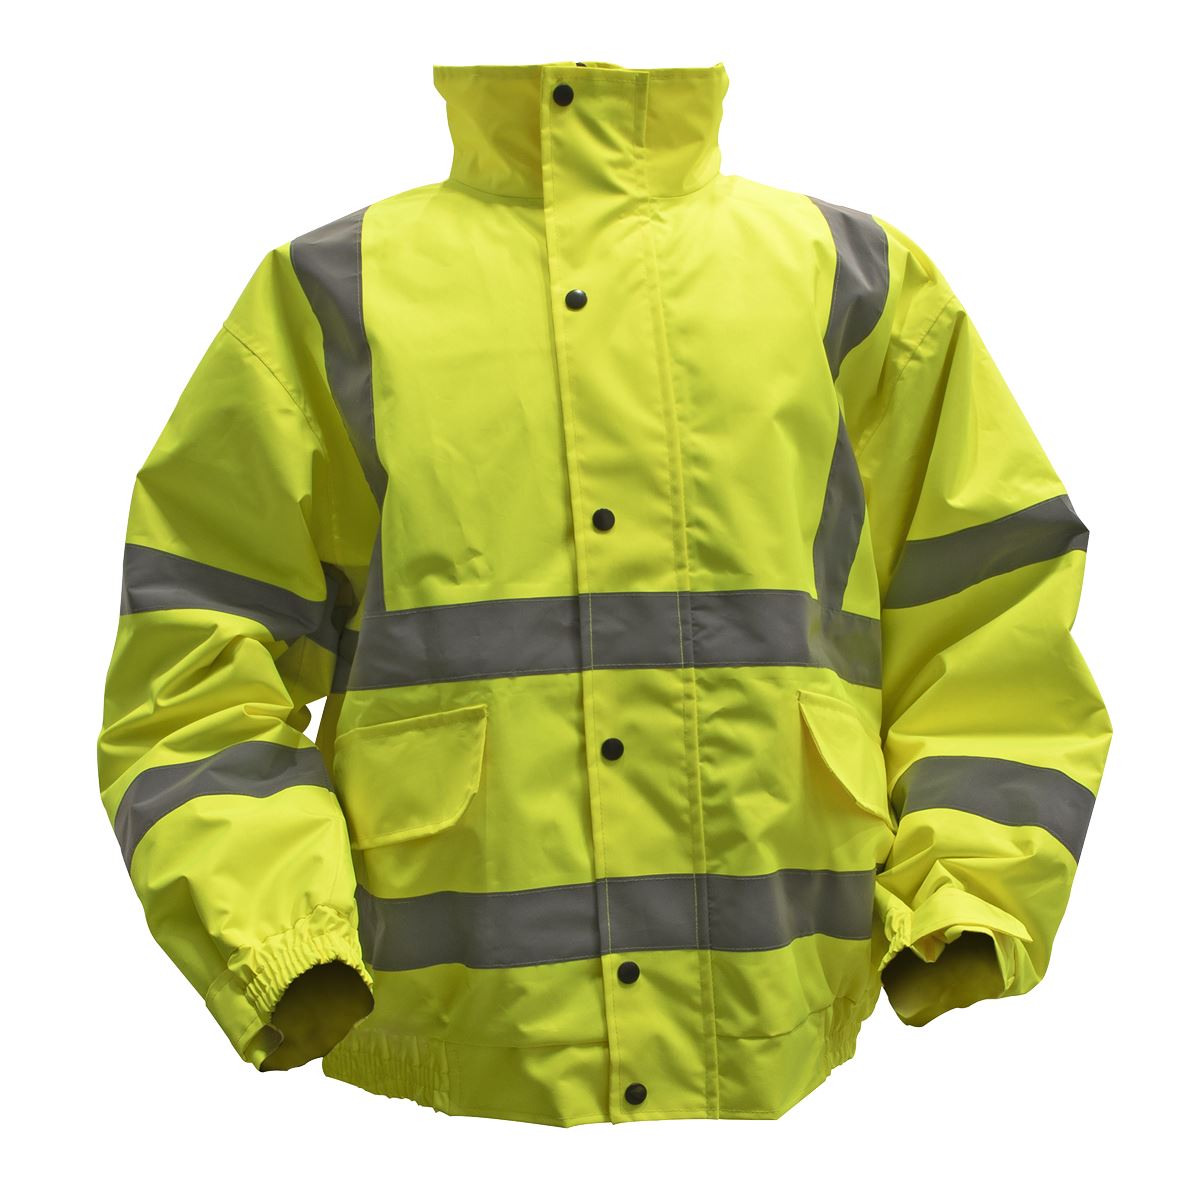 Sealey Hi-Vis Yellow Jacket with Quilted Lining & Elastic Waist- XL 802XL